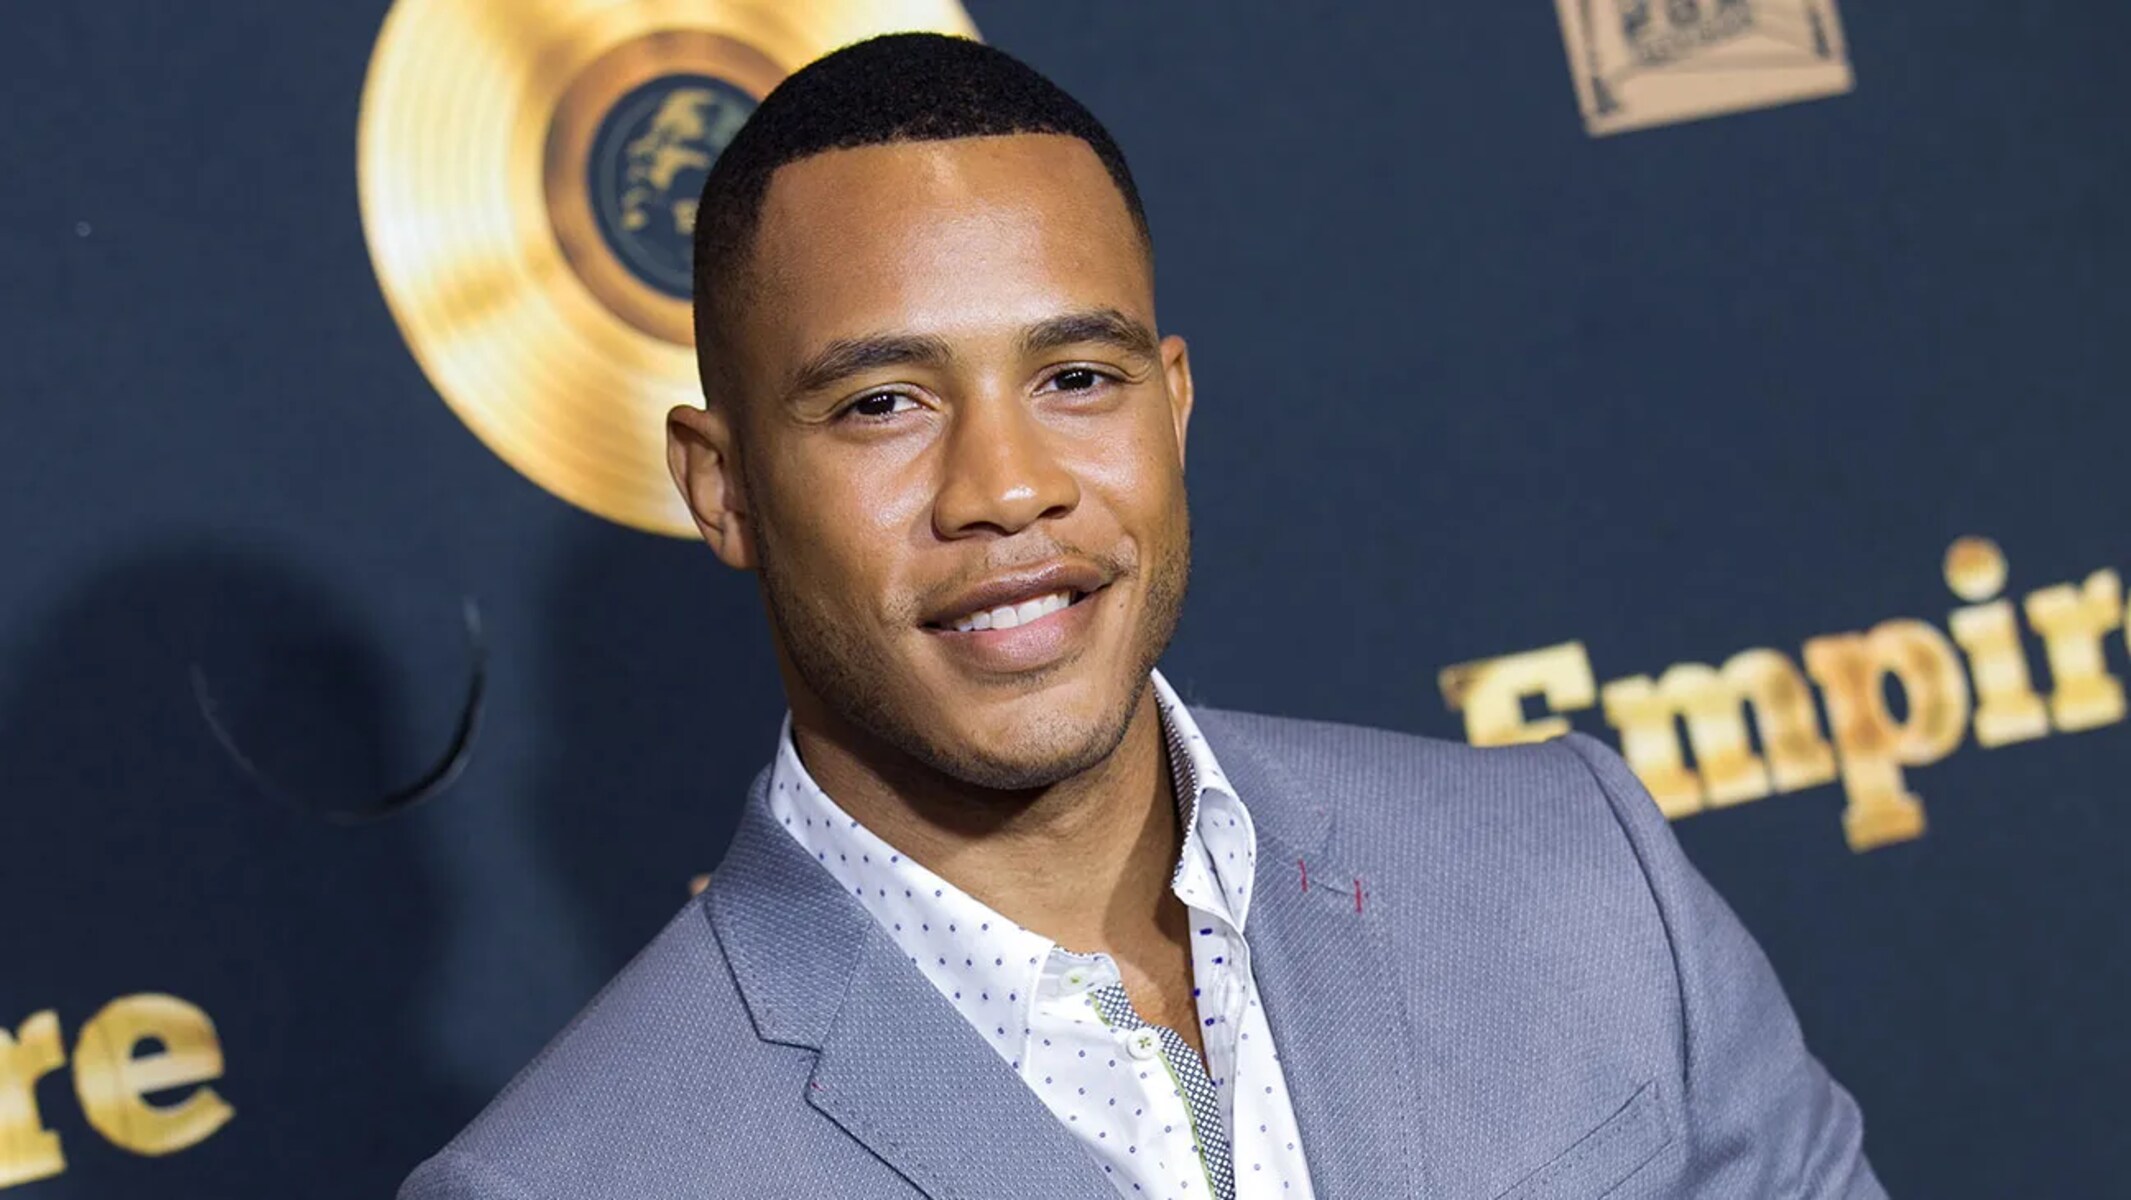 12 Astounding Facts About Trai Byers - Facts.net